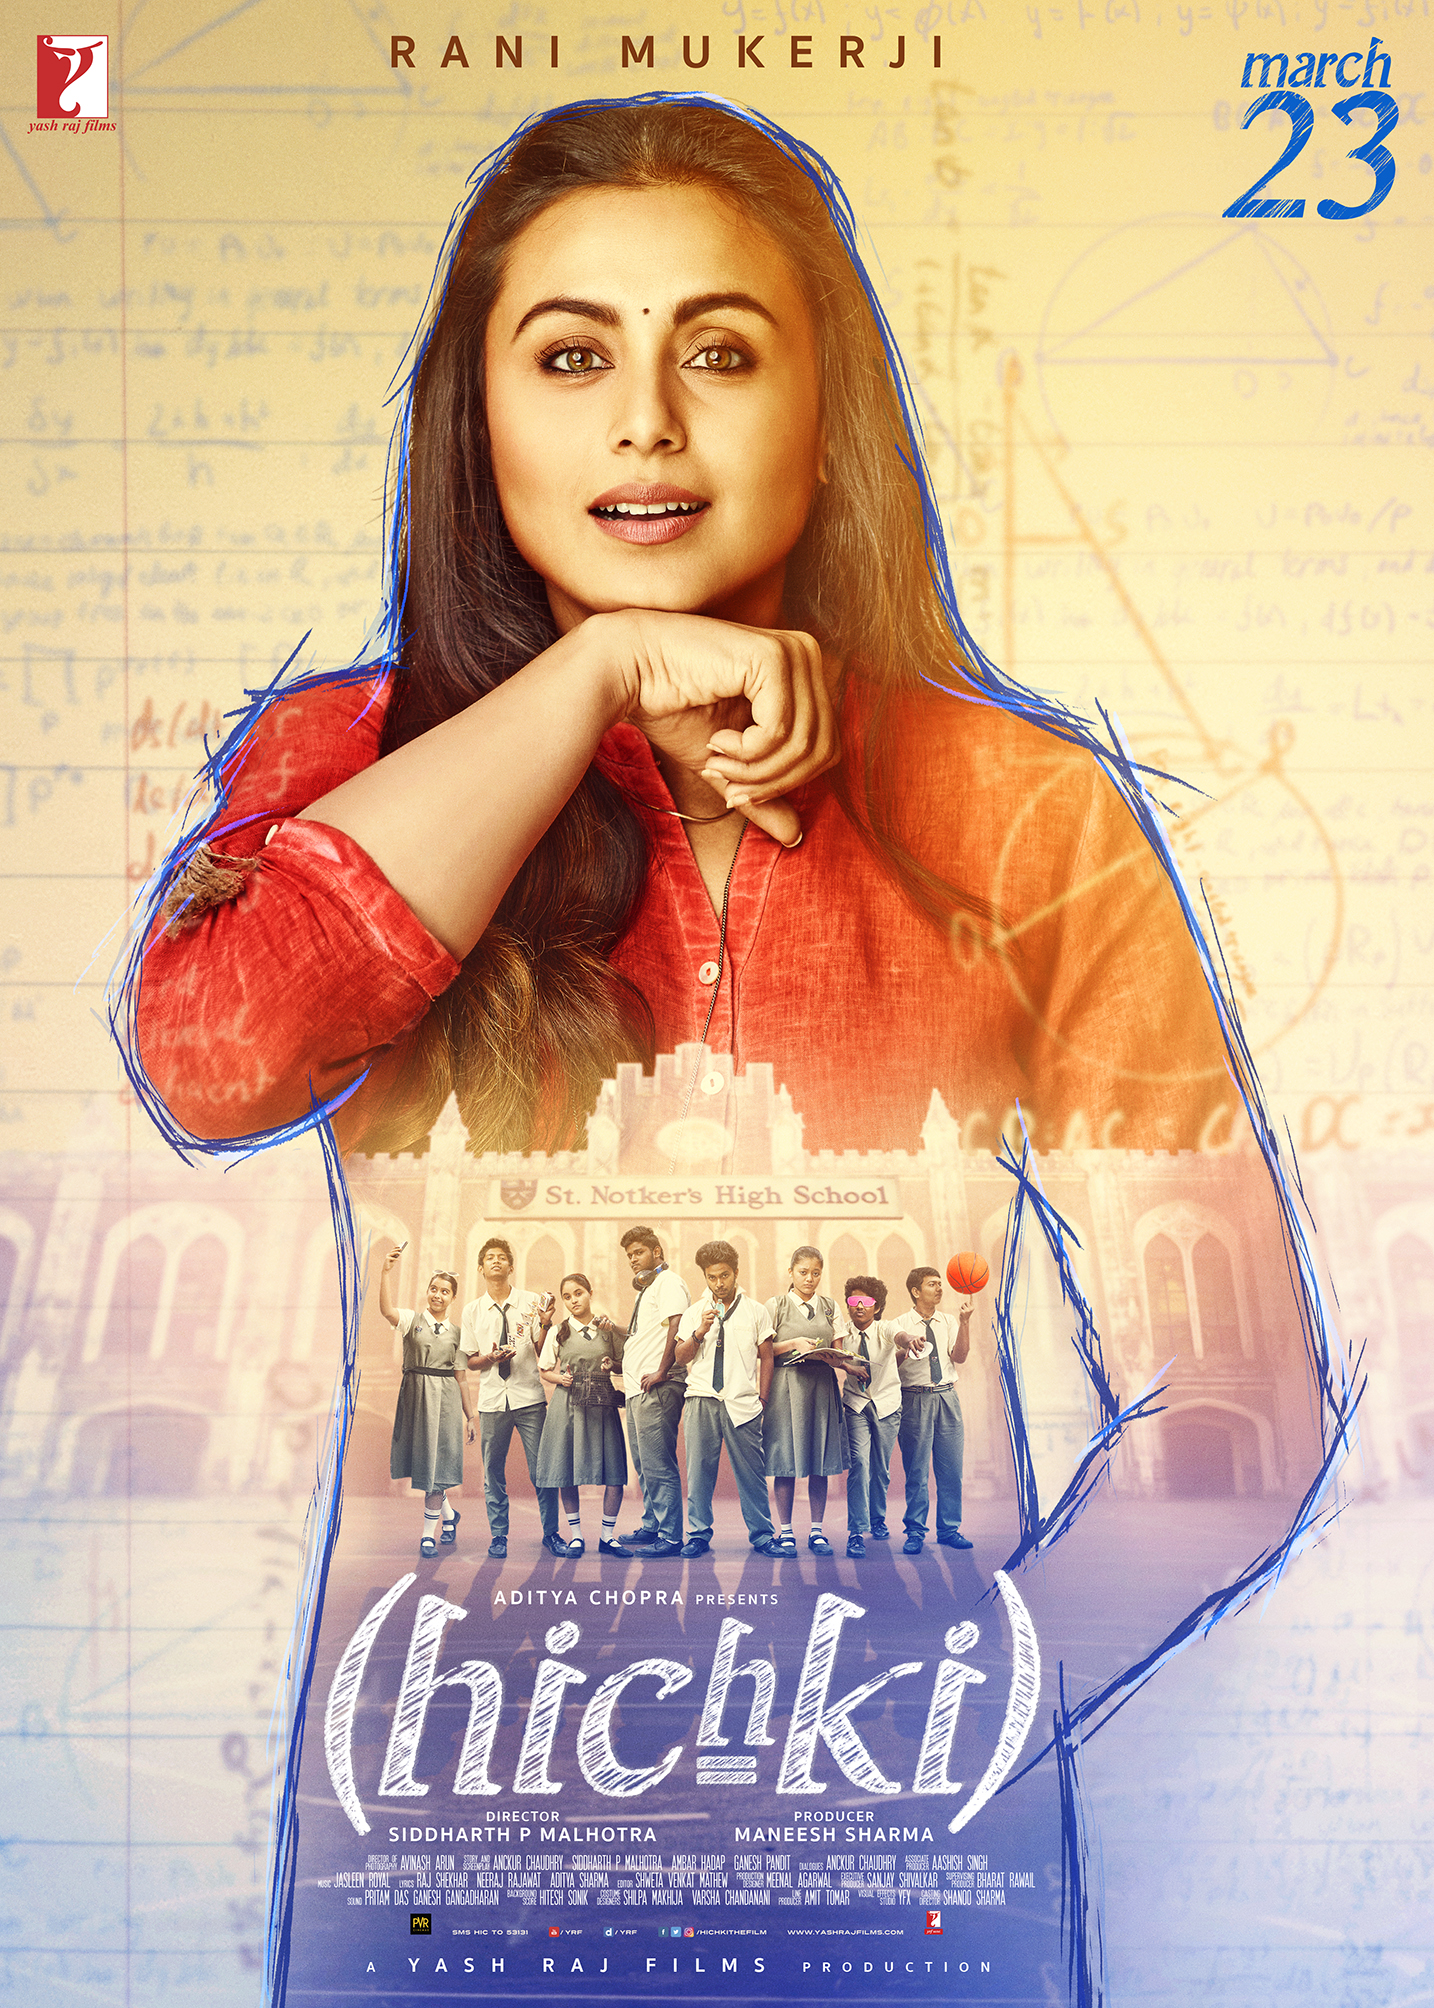 Who acted as the lead character of the movie, Hichki?